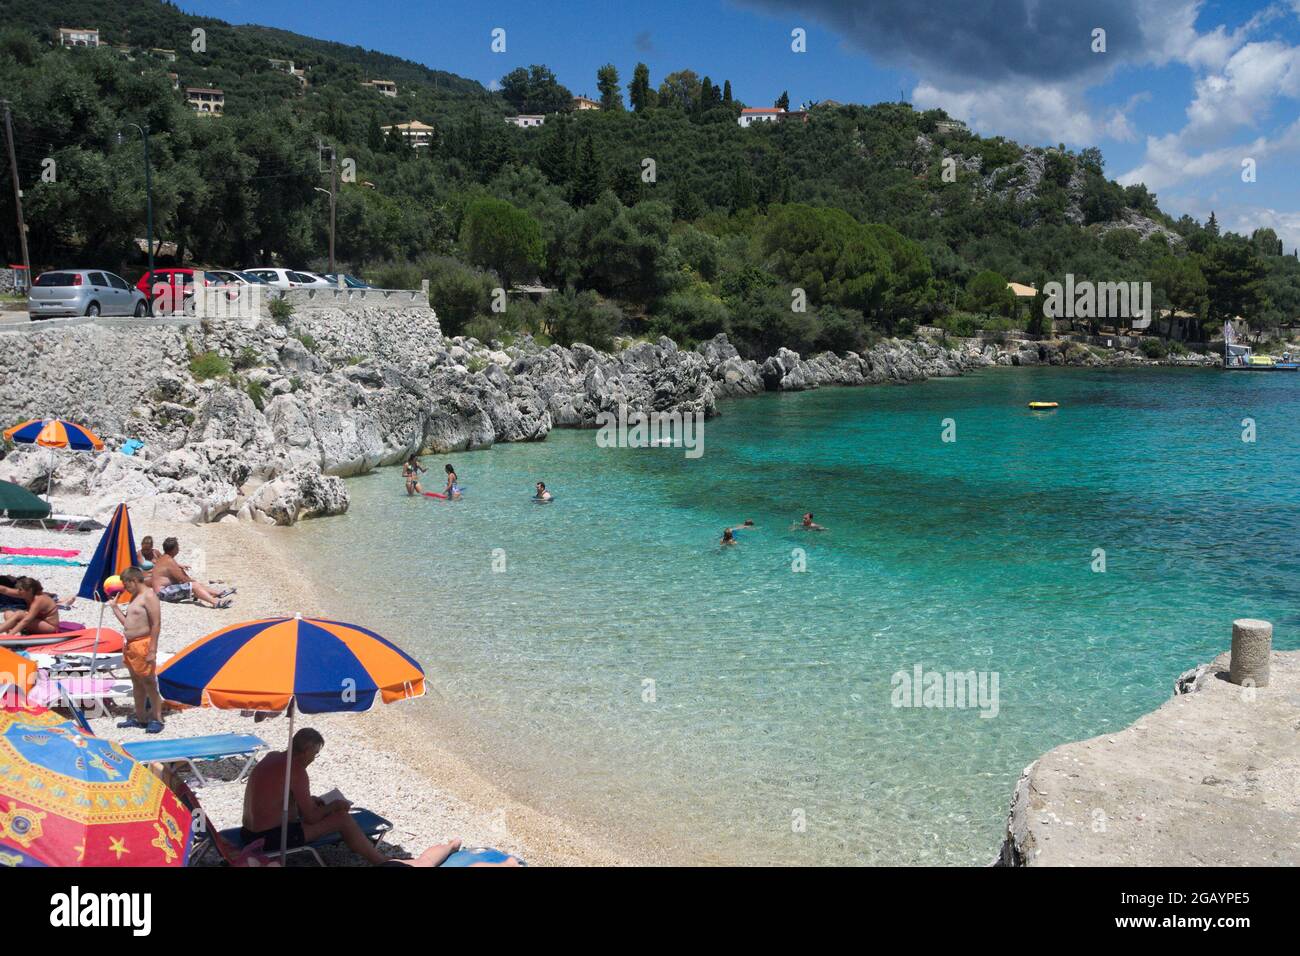 Nissaki, Corfu  Greece  July 10 2014 : Colorful beach, in a beautiful small bay with holiday makers relaxing in the summer sun.  North-East coast. Stock Photo